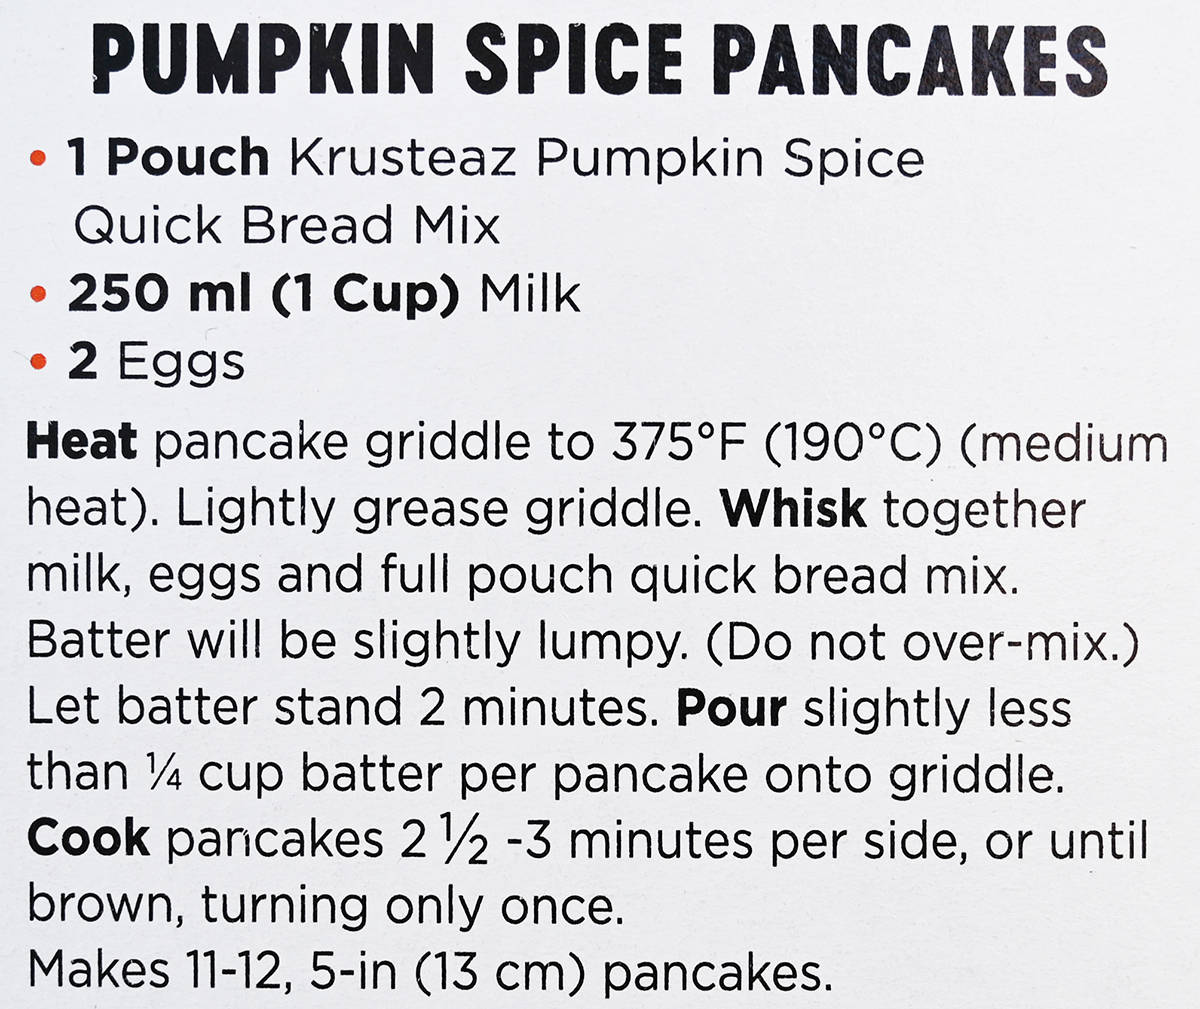 Closeup image of the pumpkin spice pancakes recipe from the back of the box.